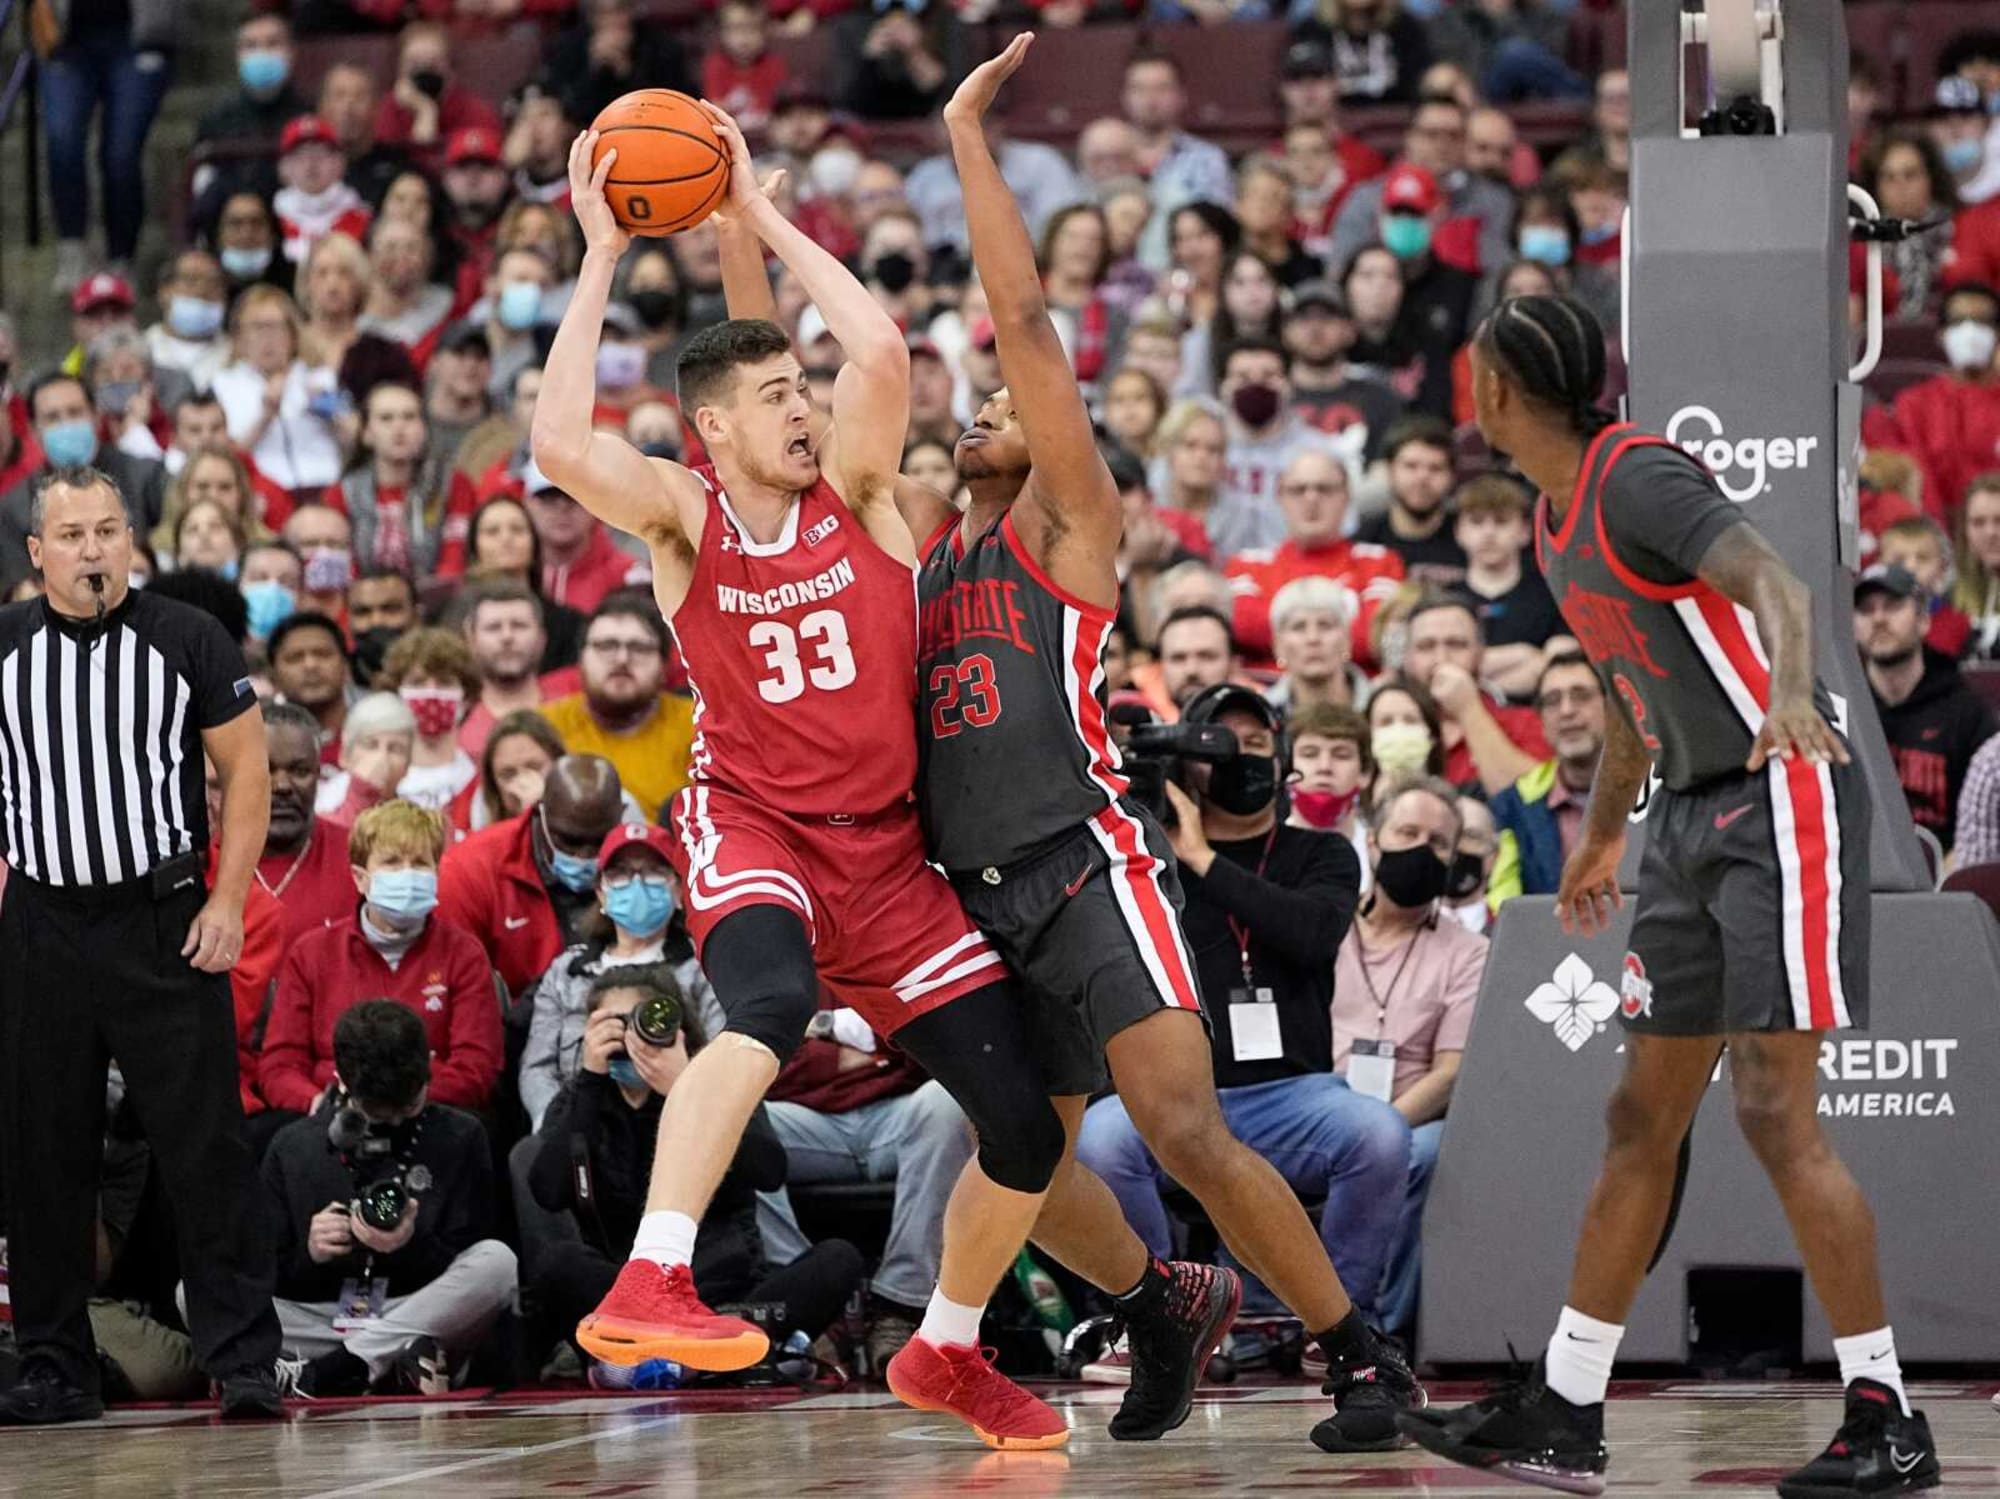 Wisconsin Game Today Wisconsin vs Ohio State, Predictions, Odds, TV Channel and Live Stream for Basketball Game Jan